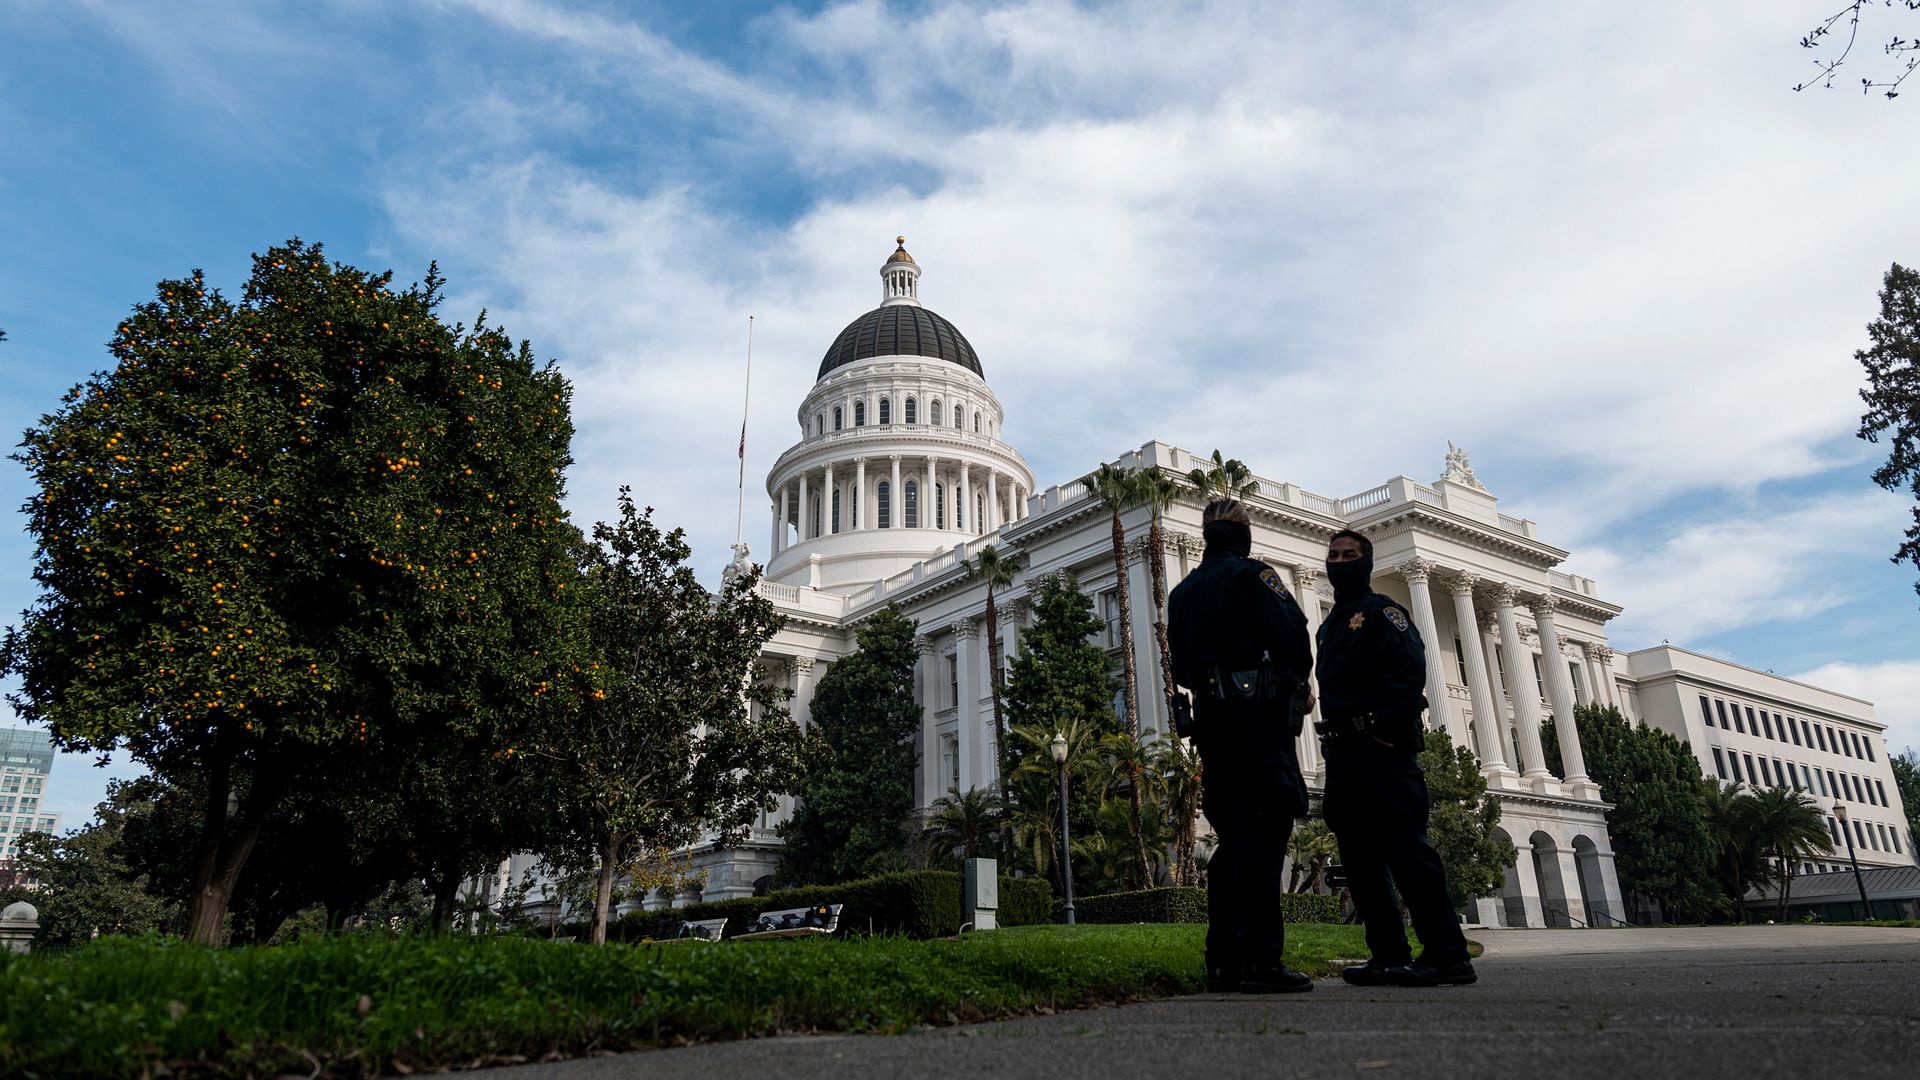 Members of the California Highway Patrol (CHP) wearing protective masks stand outside the California State Capitol building in Sacramento, California, U.S., on Friday, Jan. 15, 2021.